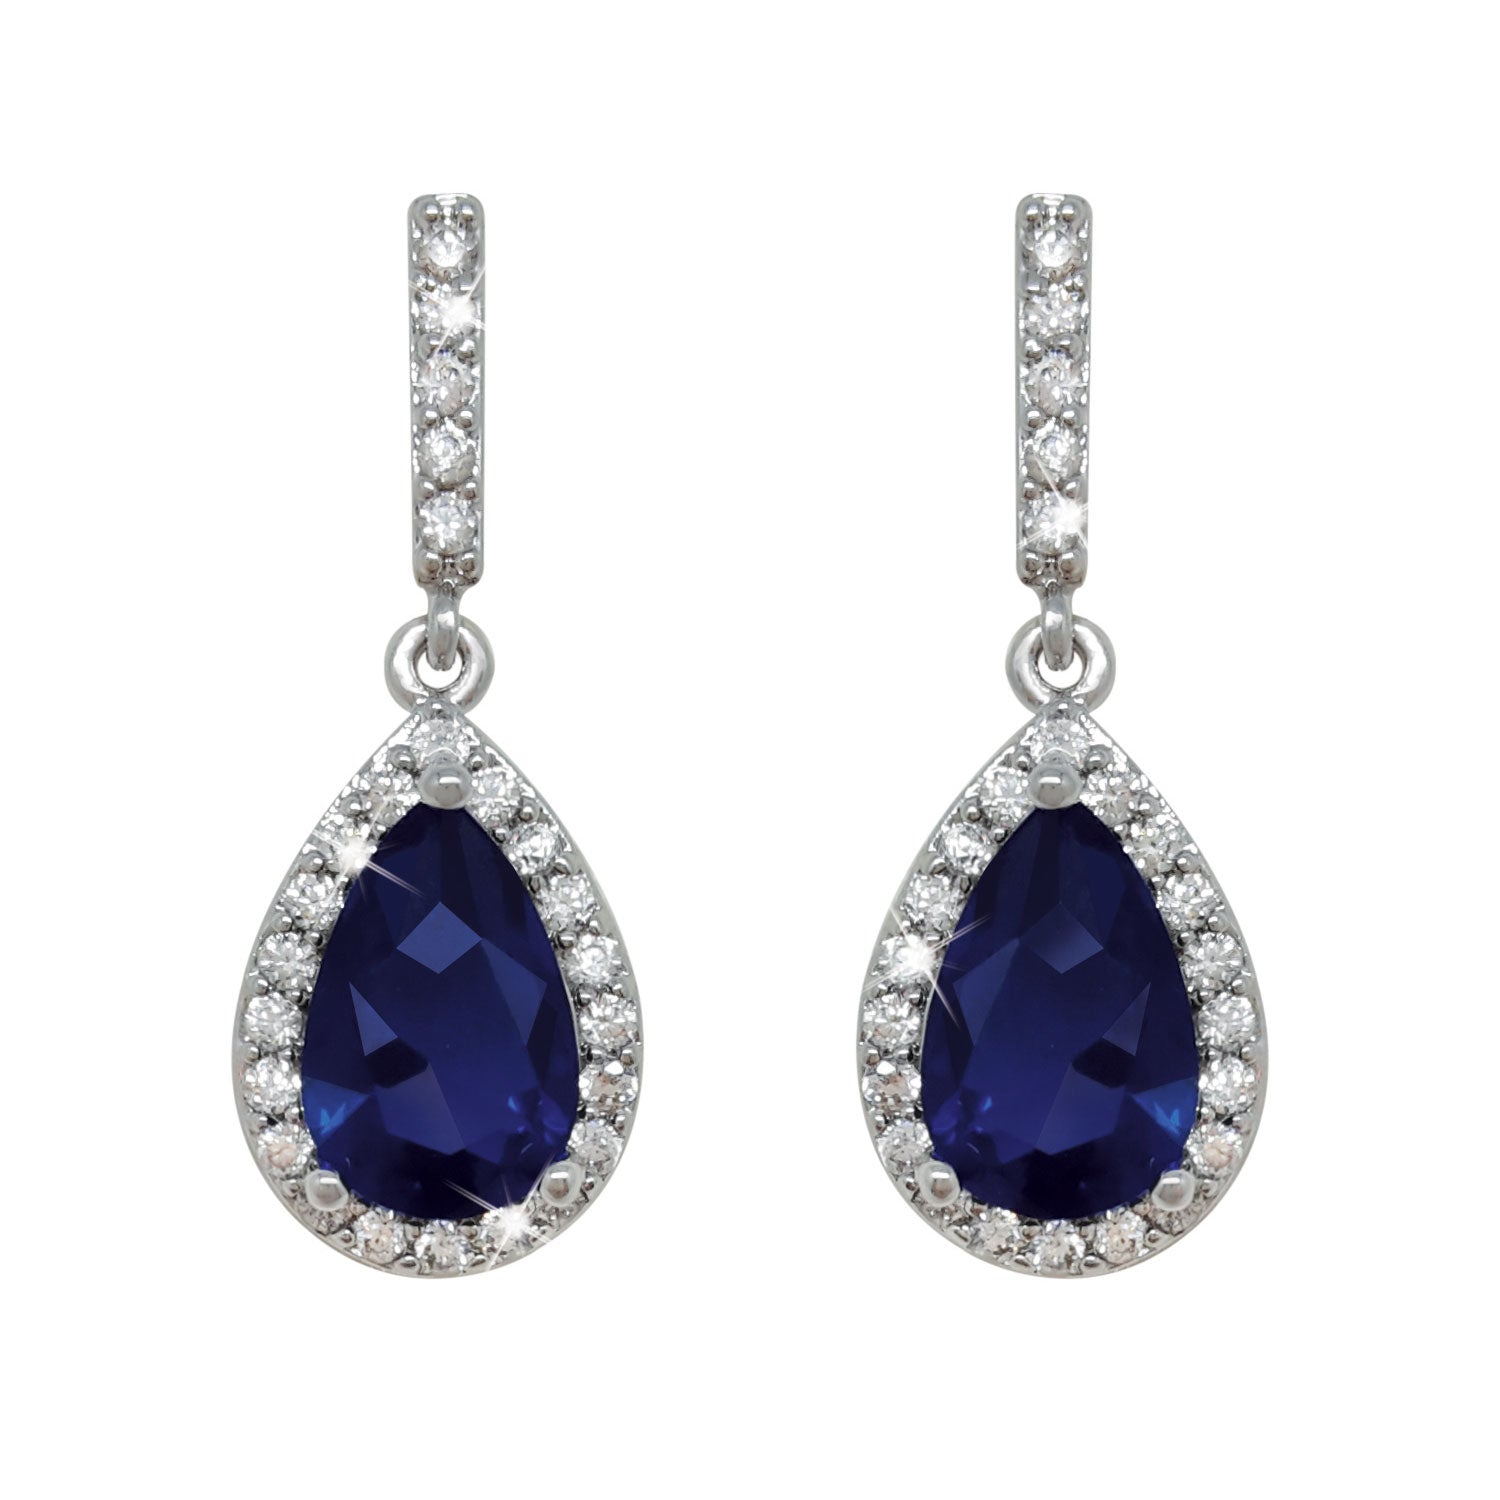 Tipperary Jewellery Pear Shaped Earrings - Blue - Silver 1 Shaws Department Stores